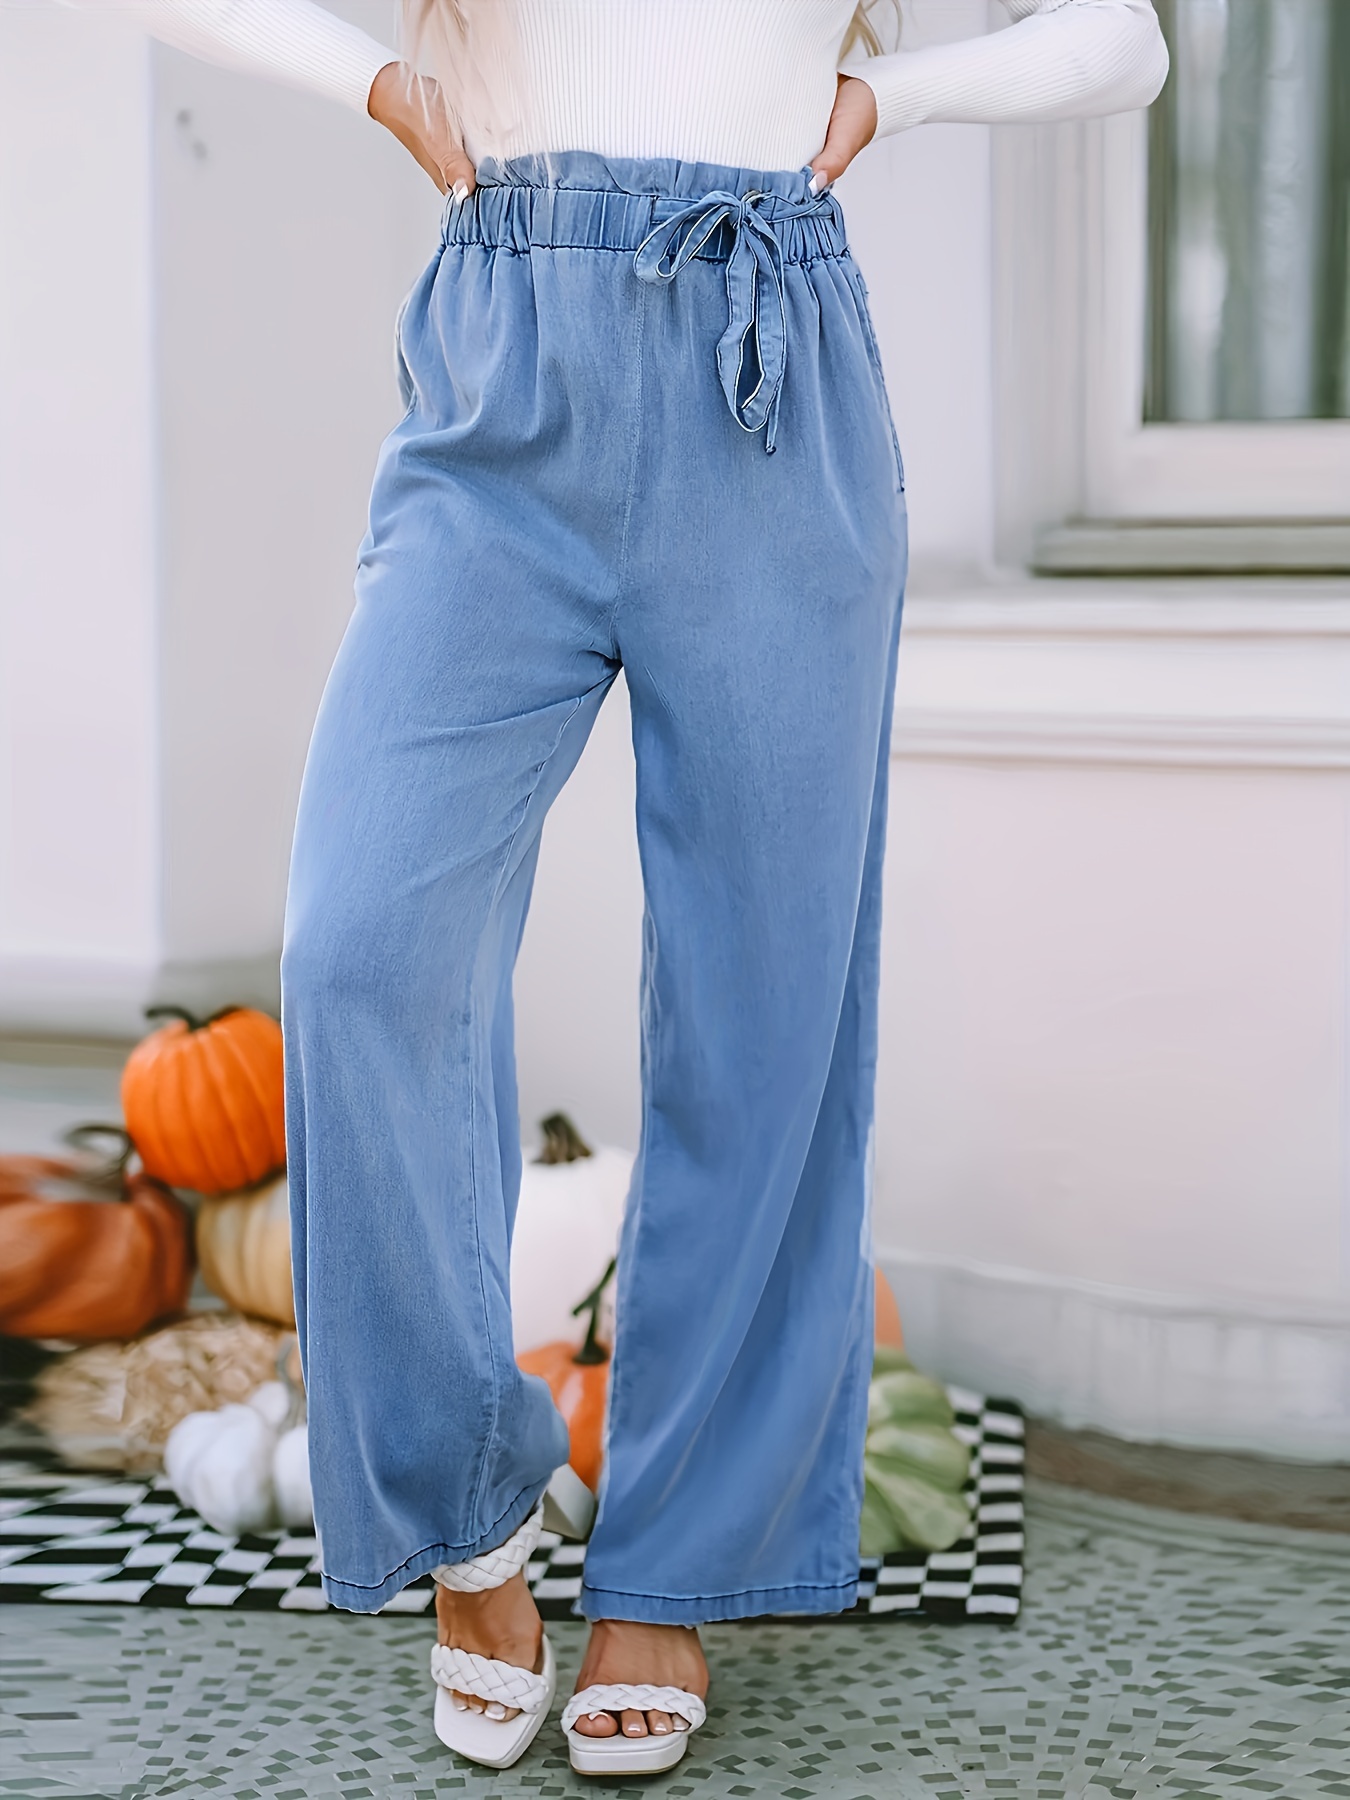 elastic waist washed straight jeans loose fit with waistband casual denim pants womens denim jeans clothing